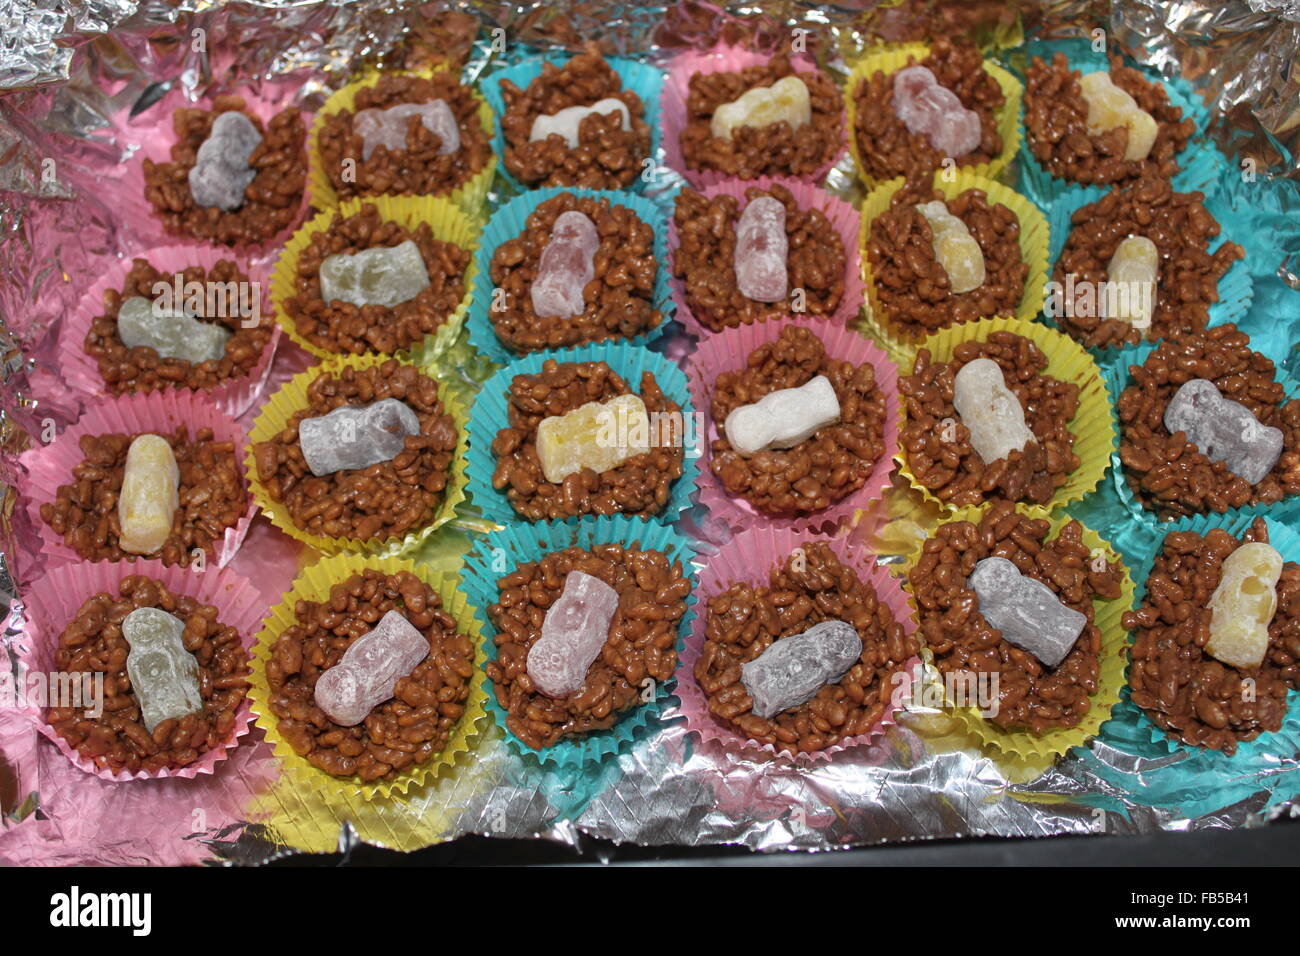 Zombie Cakes: Chocolate crispy cakes with jelly baby decorations and pink, turquoise blue and yellow cases Stock Photo